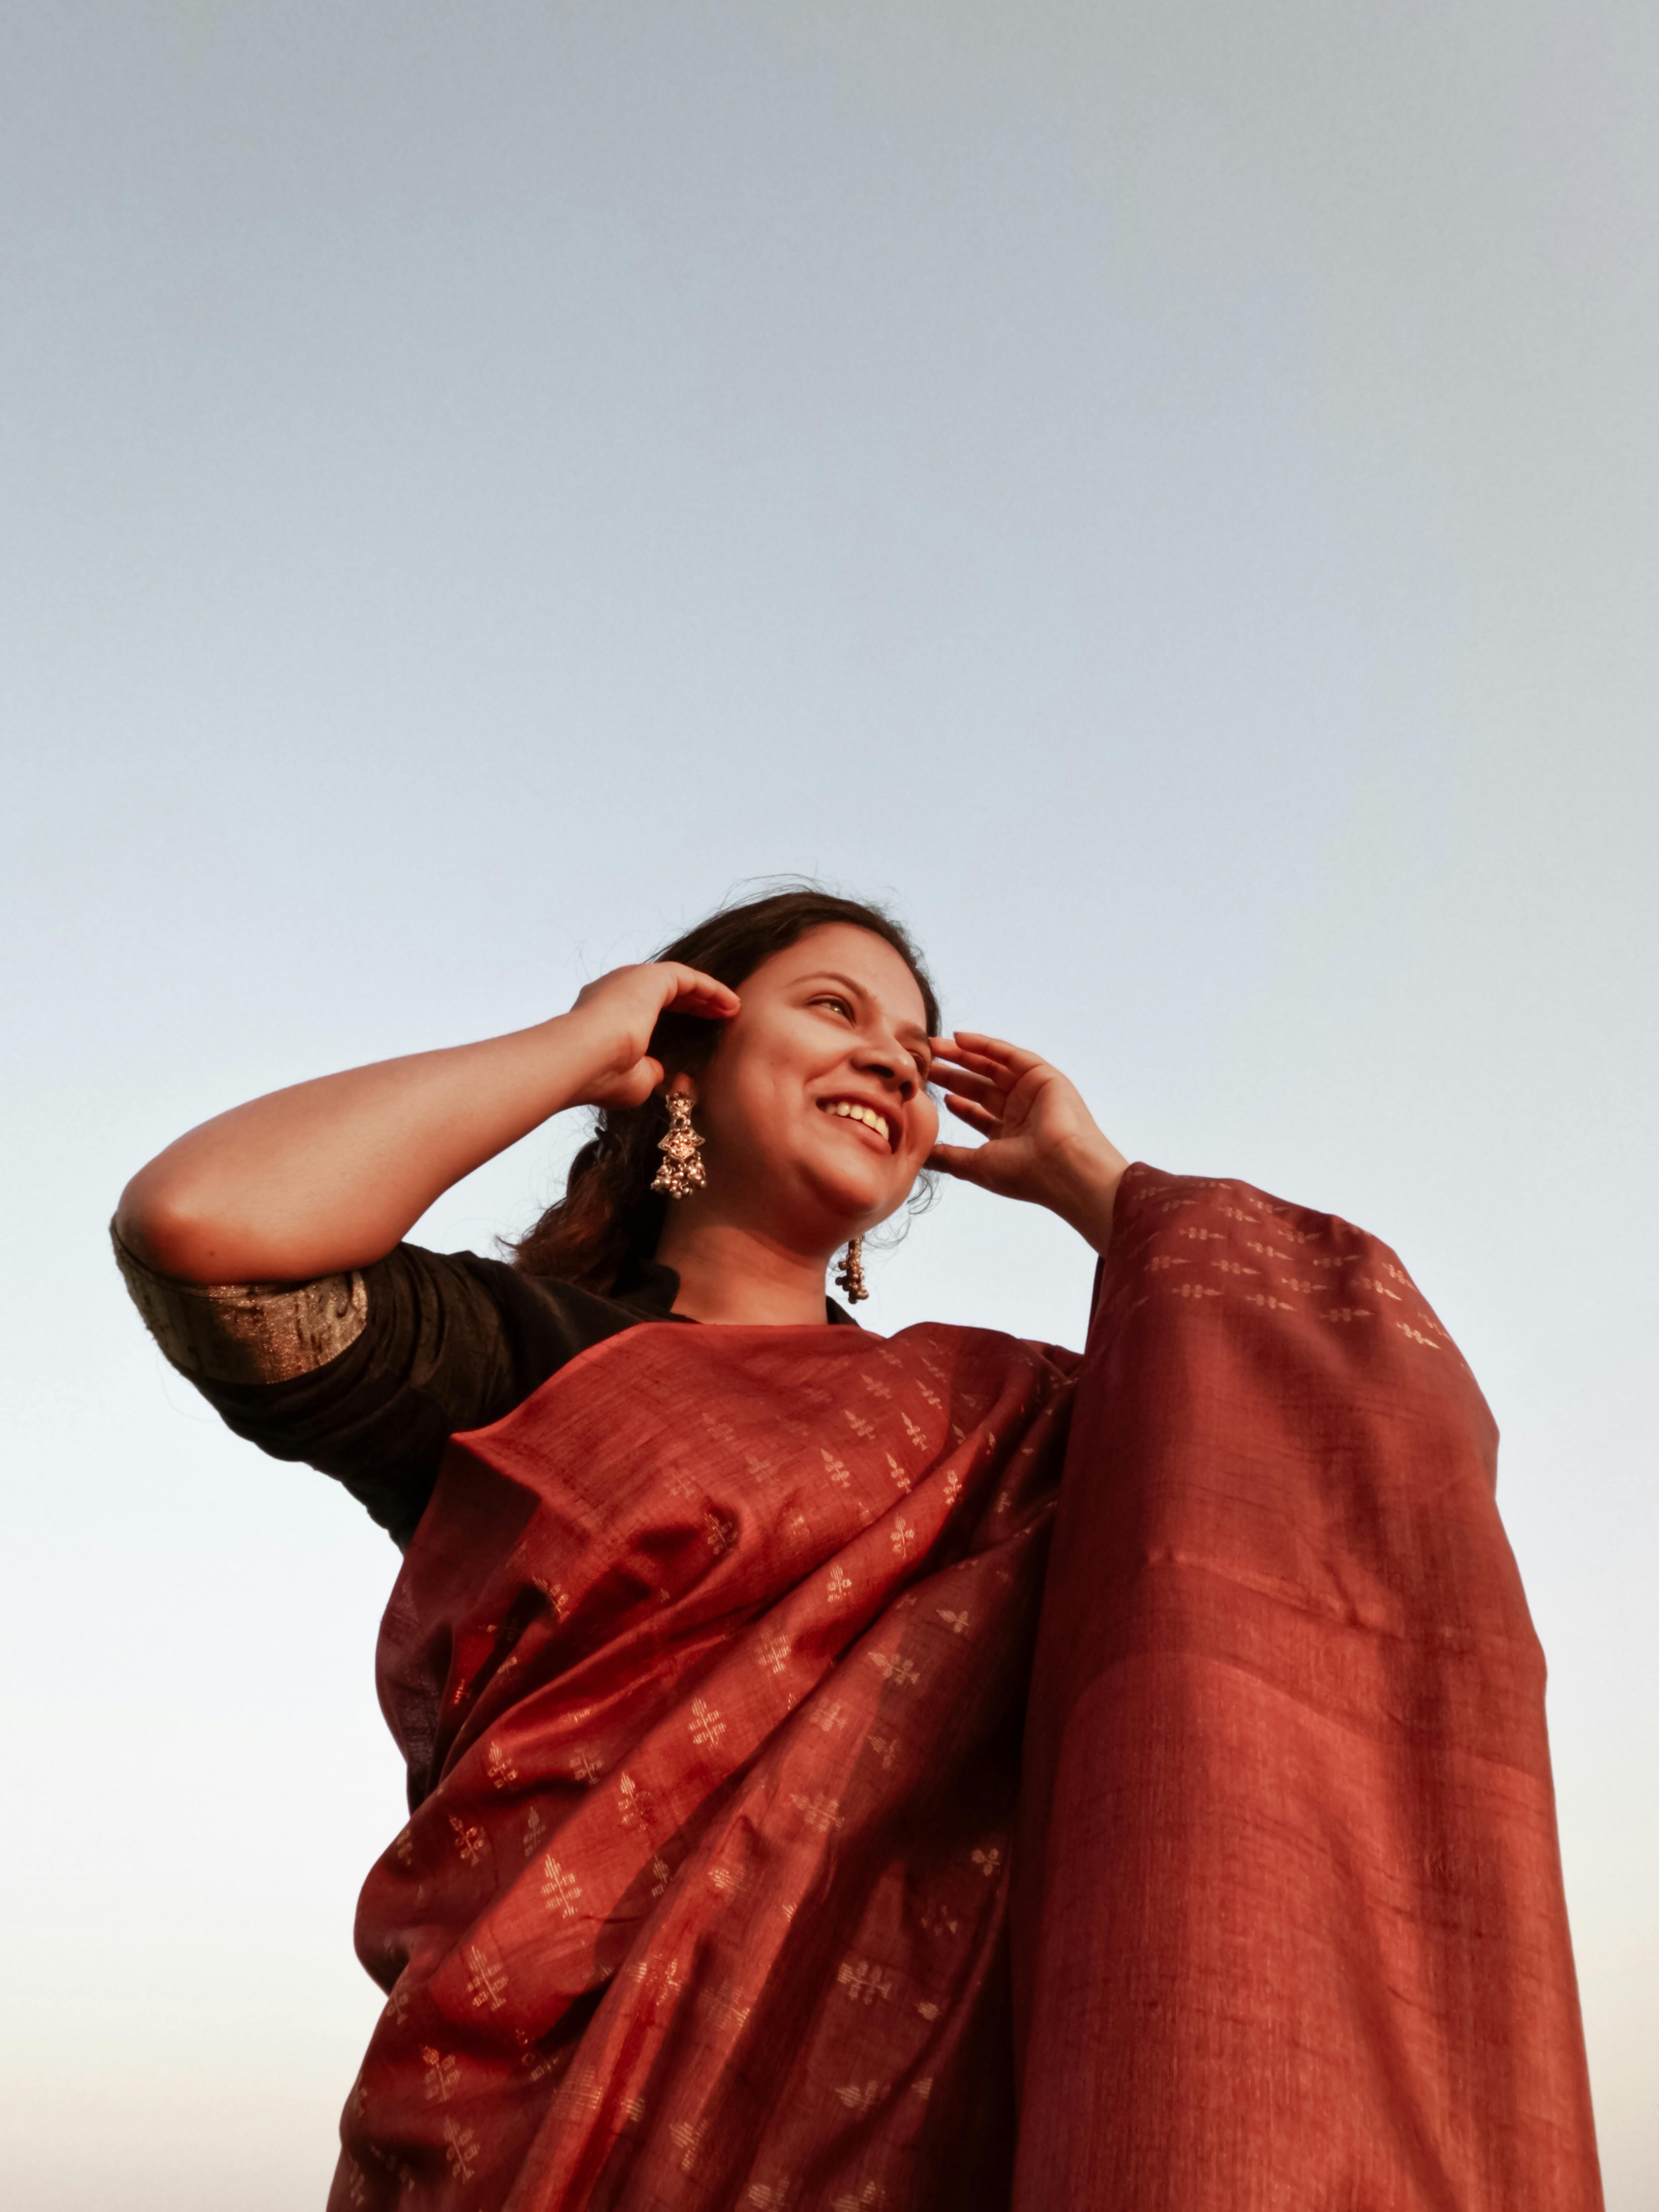 A Woman Wearing a Saree and Smiling · Free Stock Photo